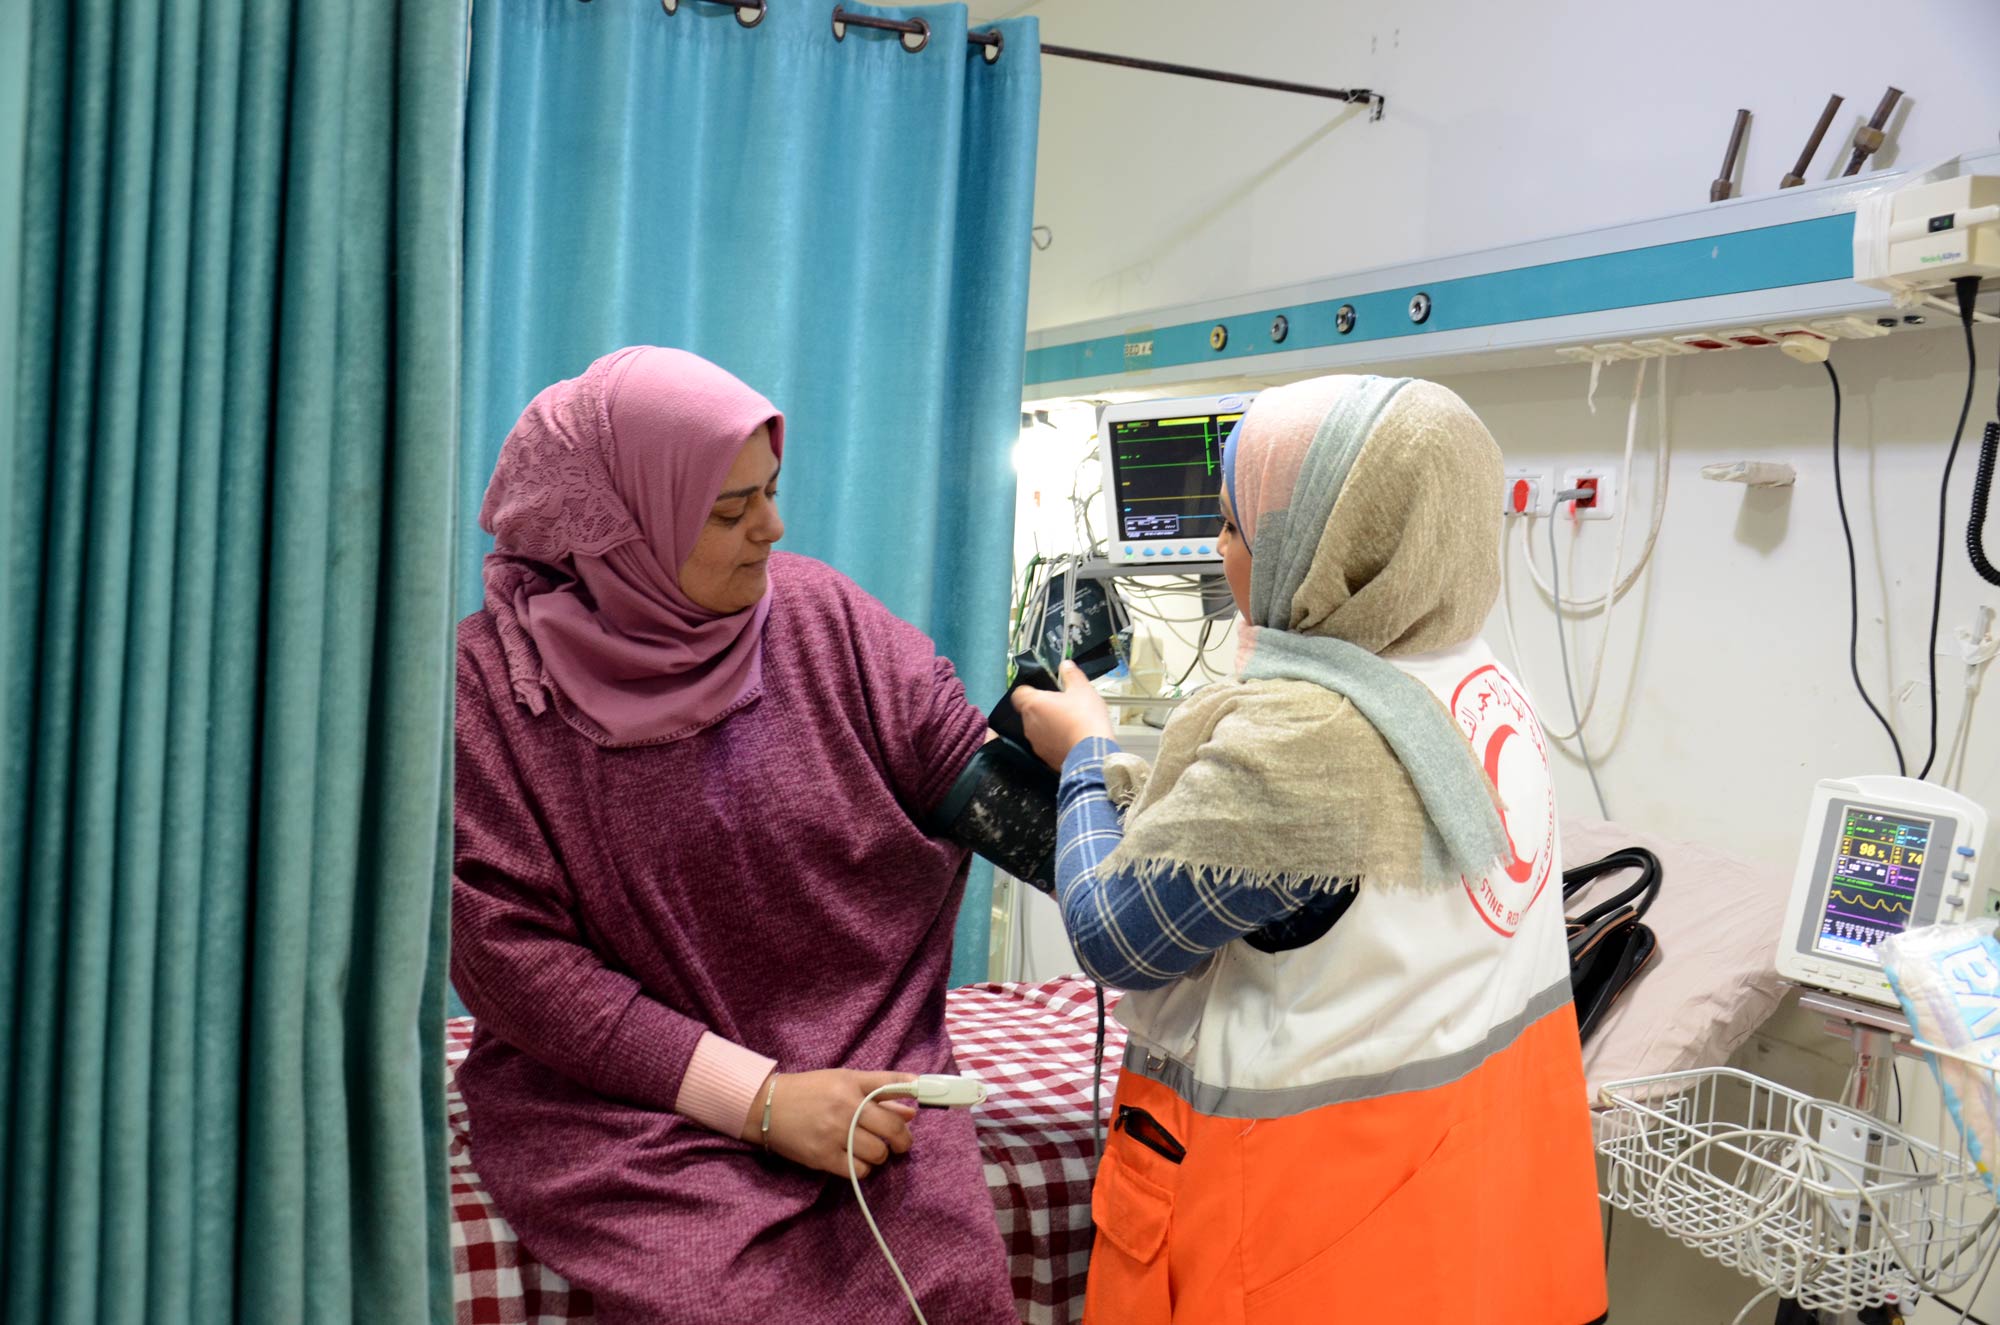 Iman, clinic patient with high blood pressure